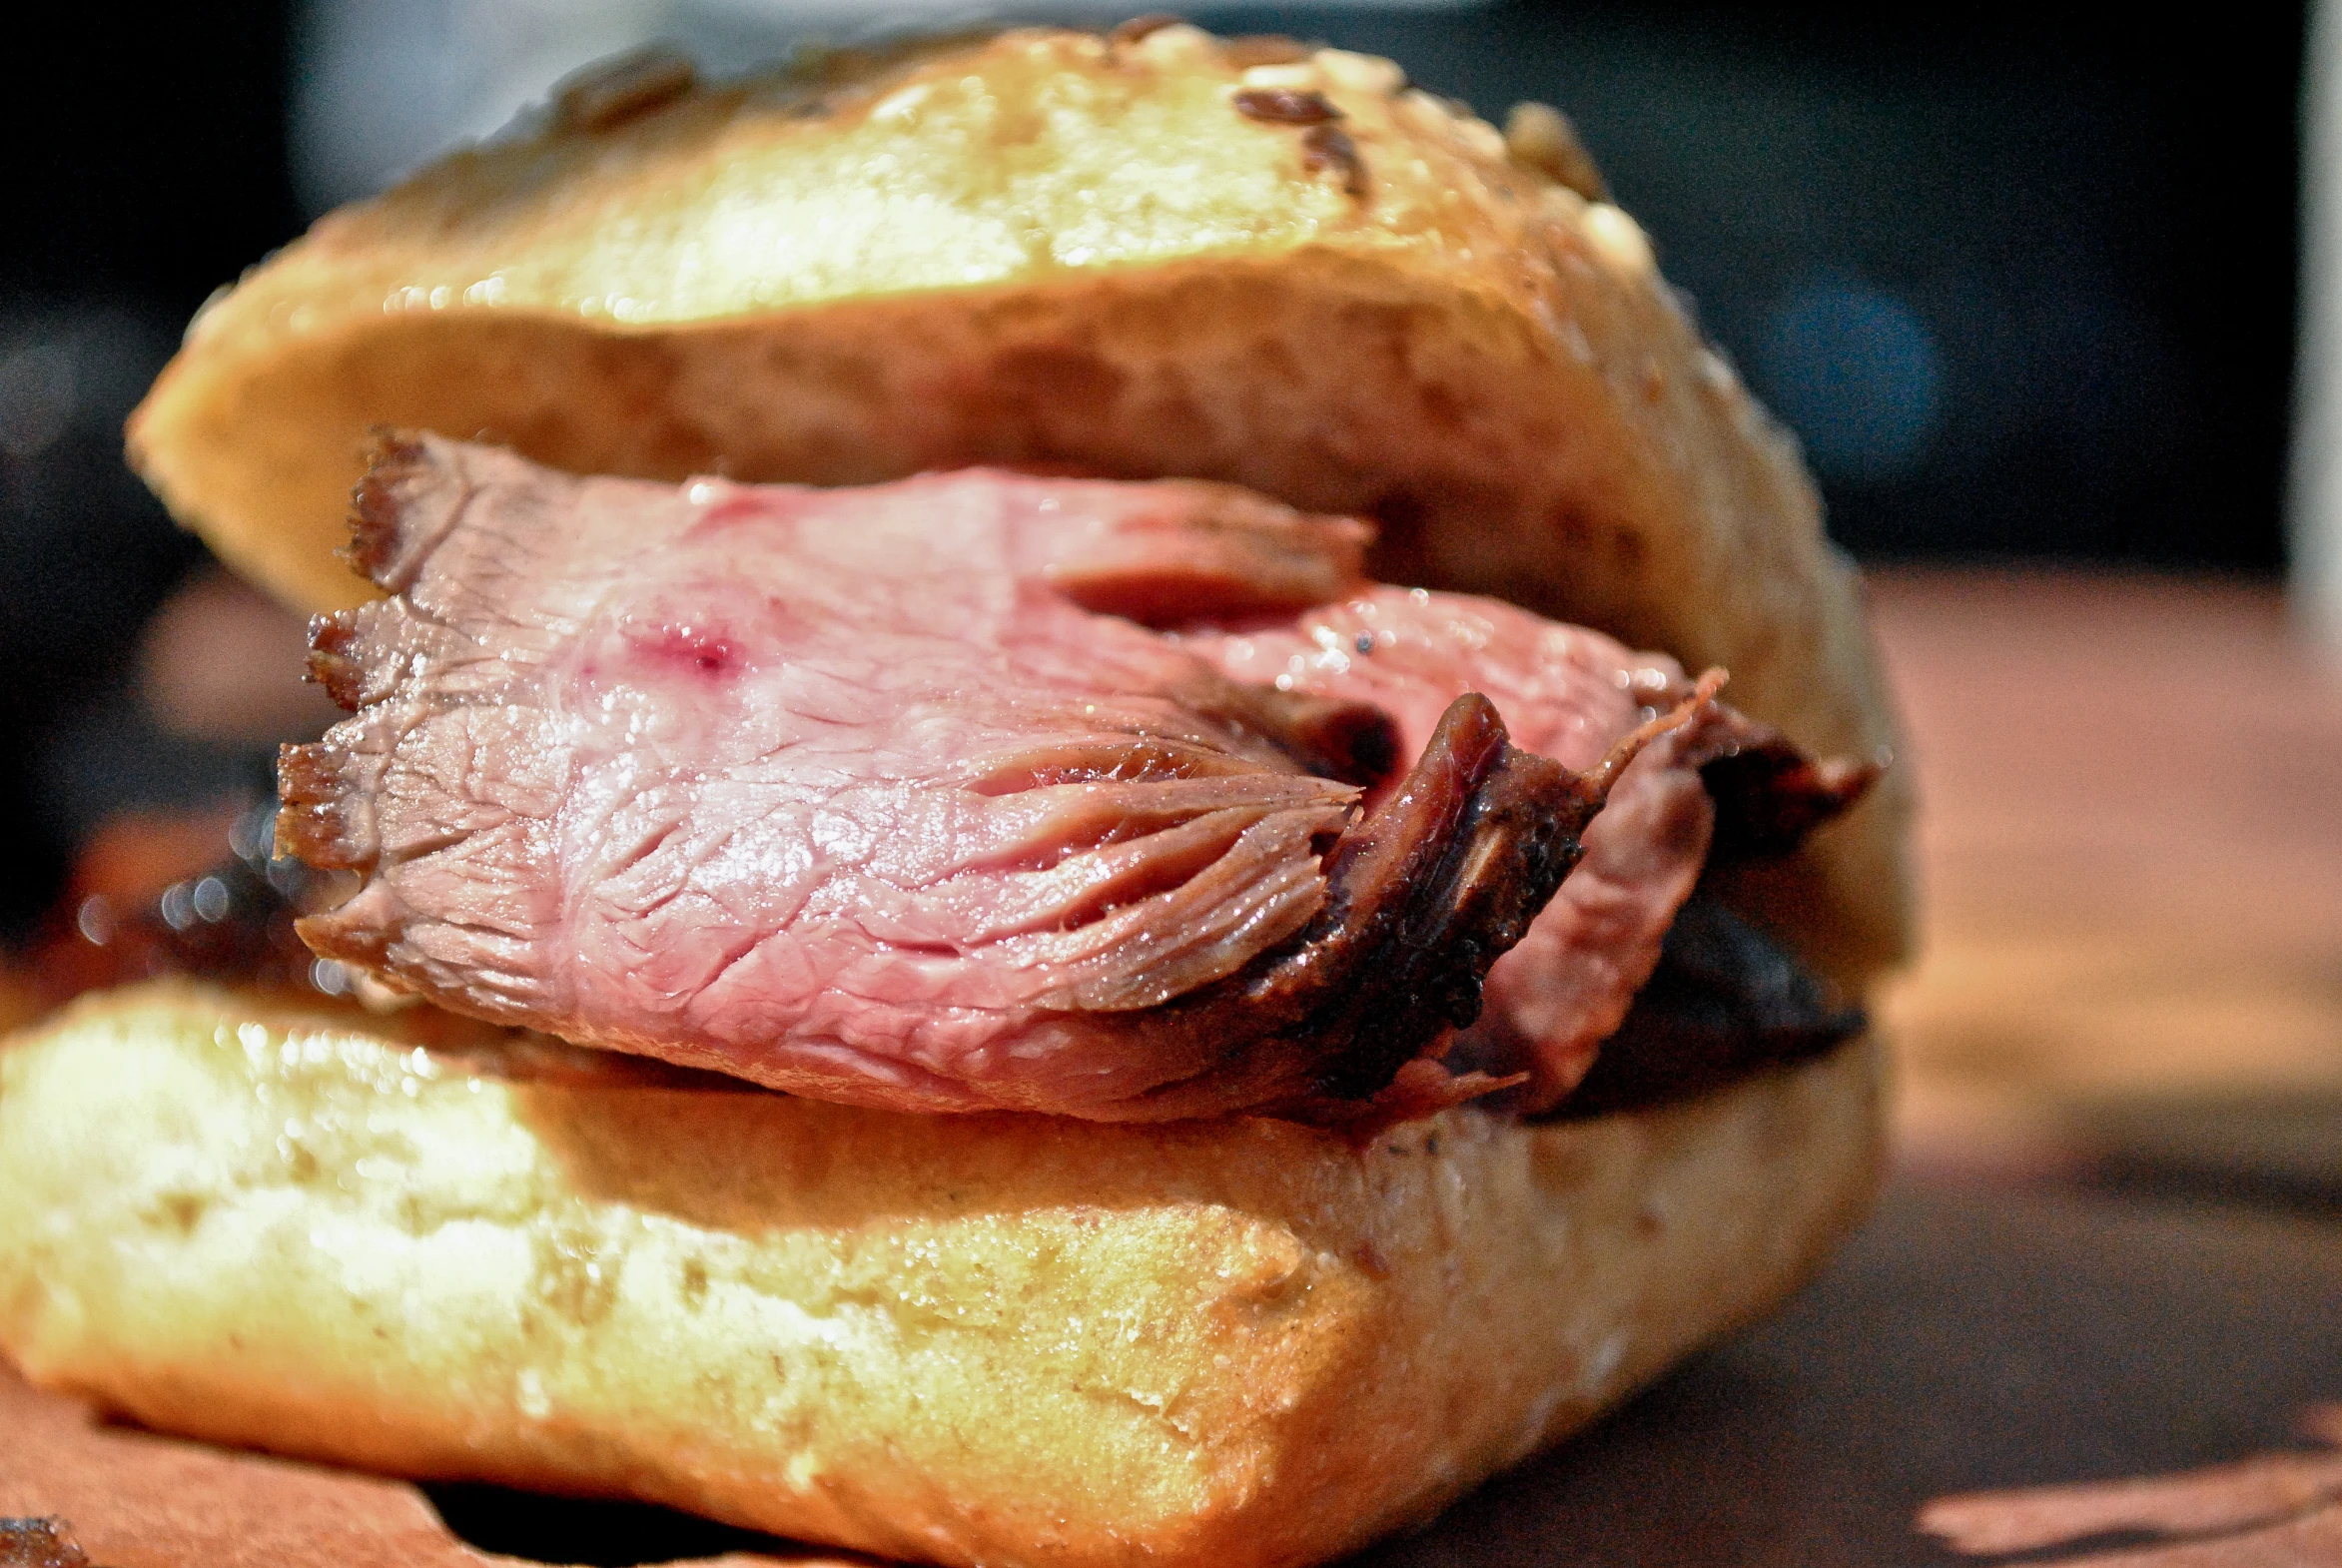 a roast beef sandwich made with bread